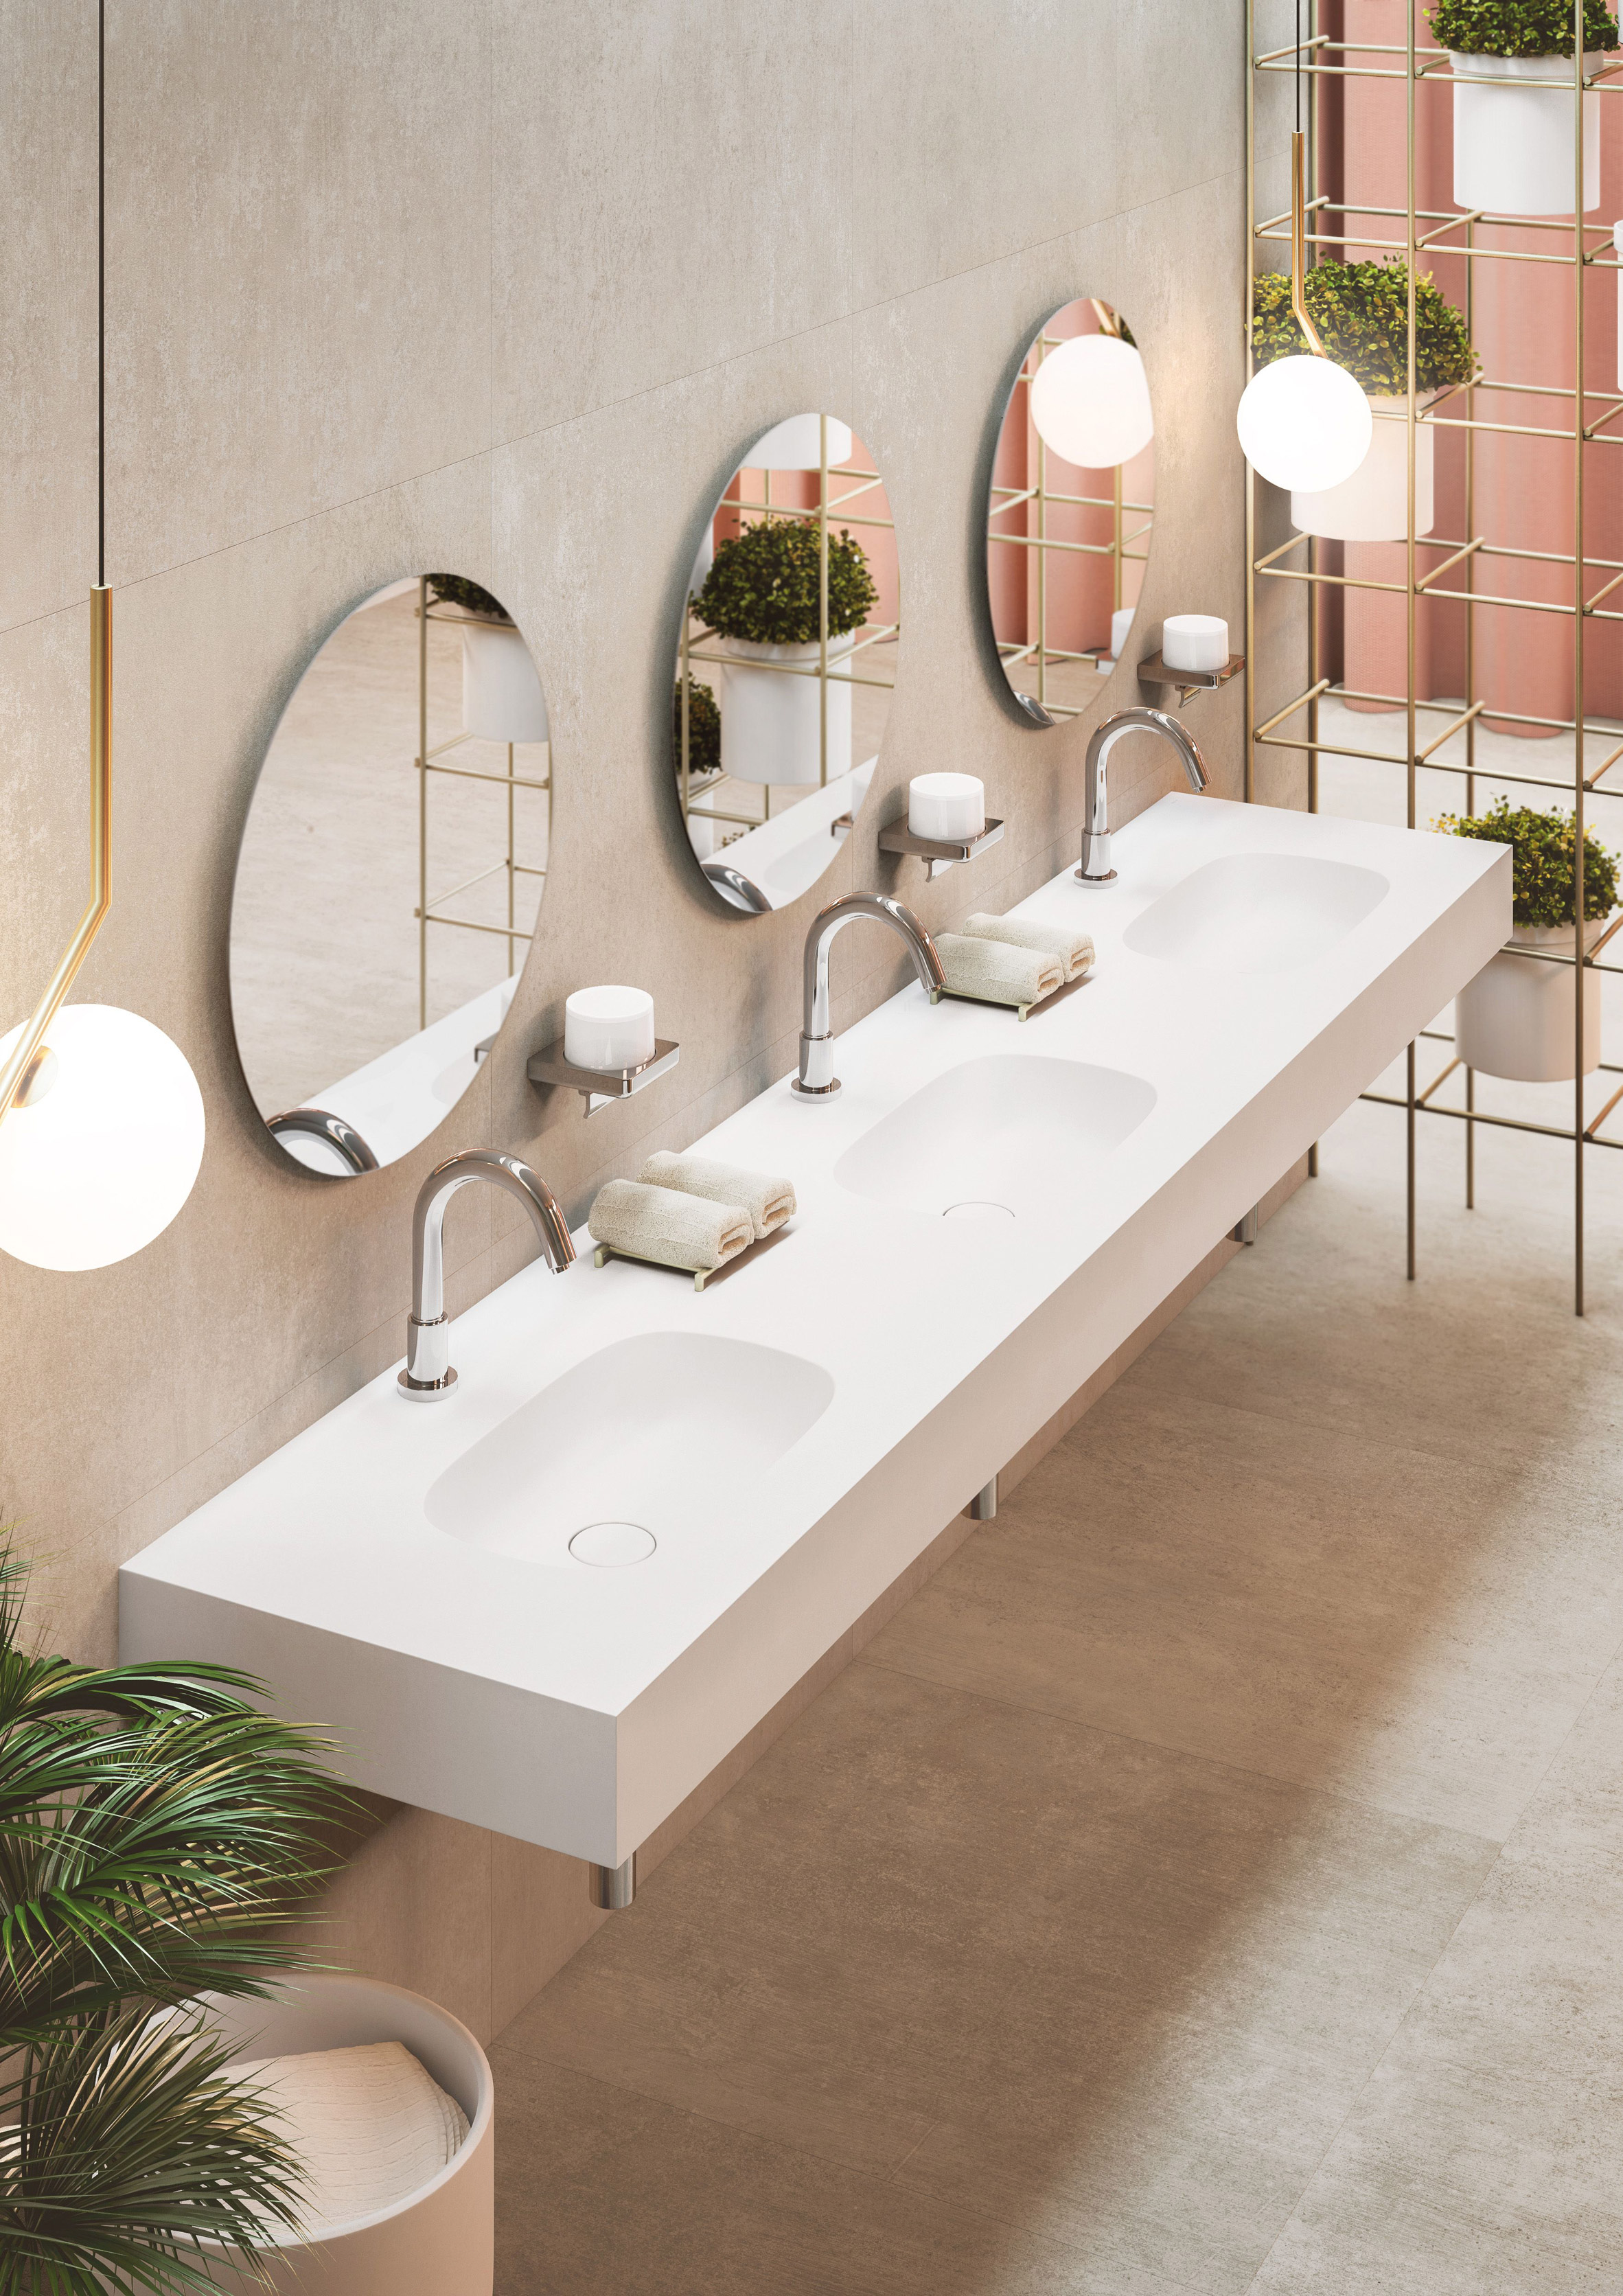 Roca launches bathroom collection made from Surfex